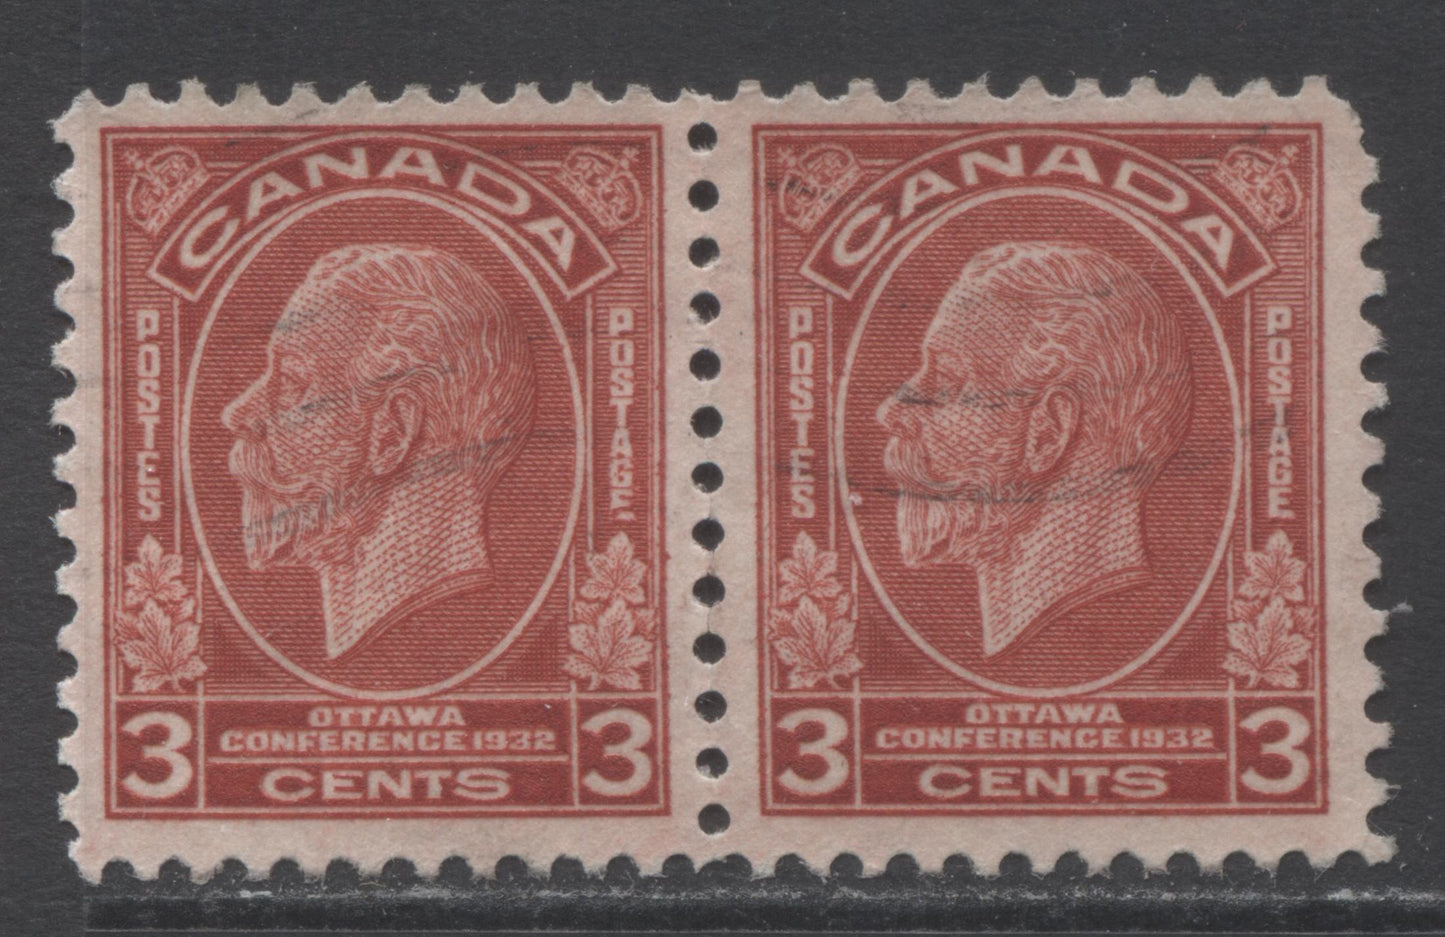 Lot 128 Canada #192i 3c Deep Red King George V, 1932 Imperial Economic Conference Issue, A Very Fine Used Pair Showing The Broken E Variety, From Plate 2 LR Position 87